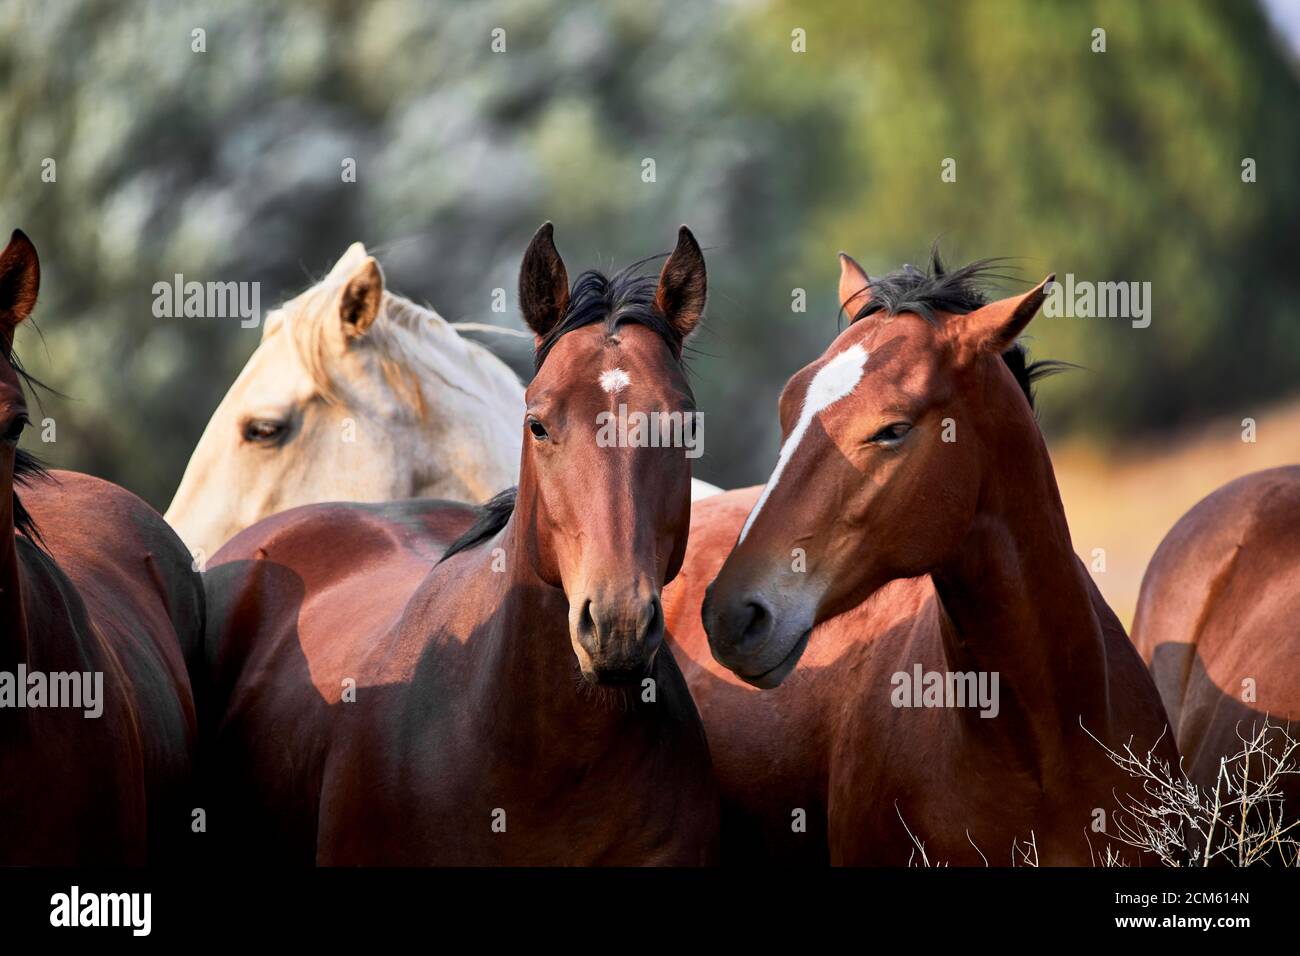 Domesticated young horses in a field with shallow depth of field Stock Photo